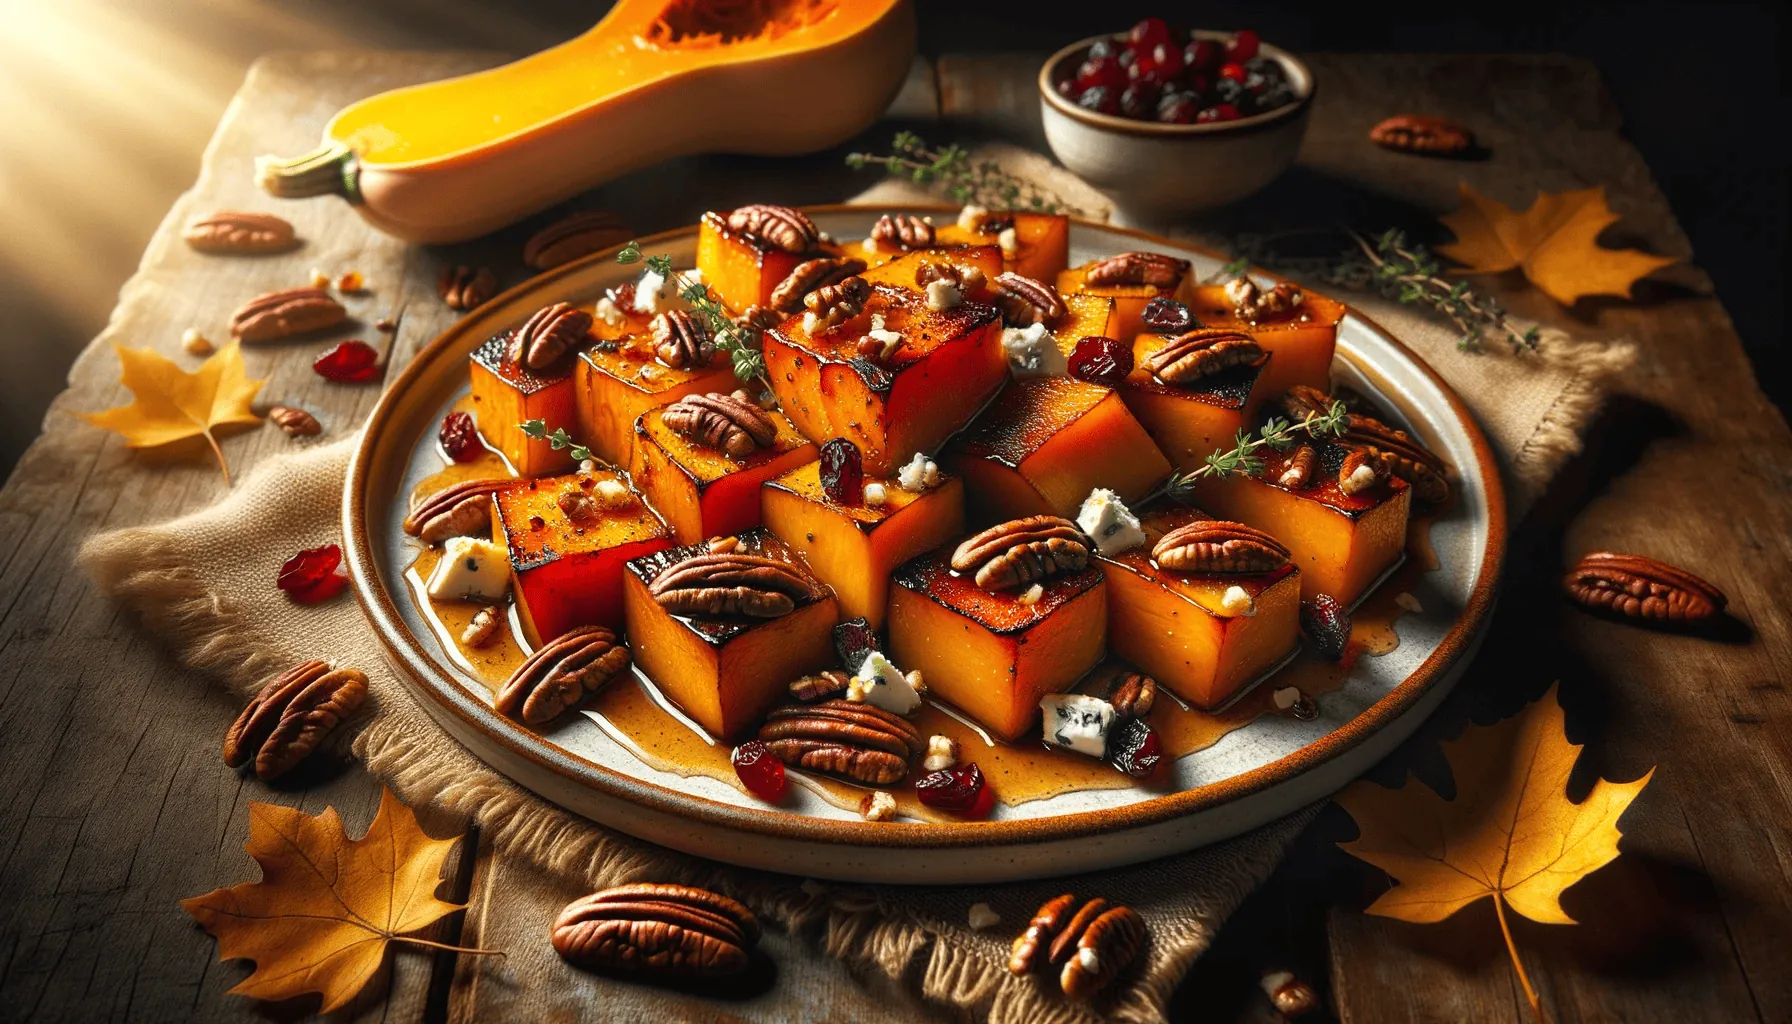 Maple-roasted butternut squash, ready to serve